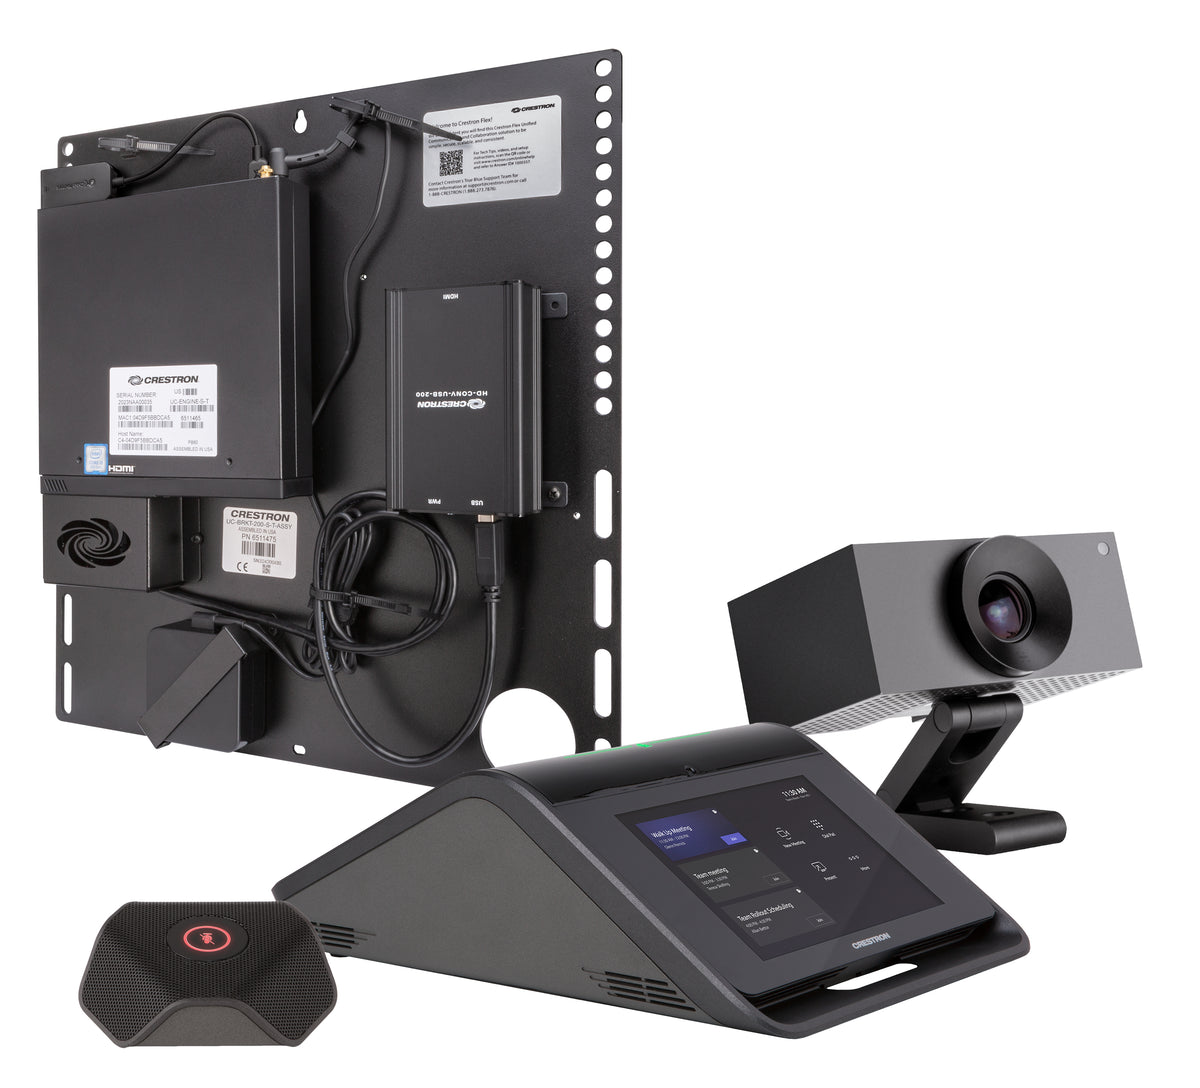 Crestron Flex UC-M70-T - Video Conferencing Suite - Certified for Microsoft Teams Rooms